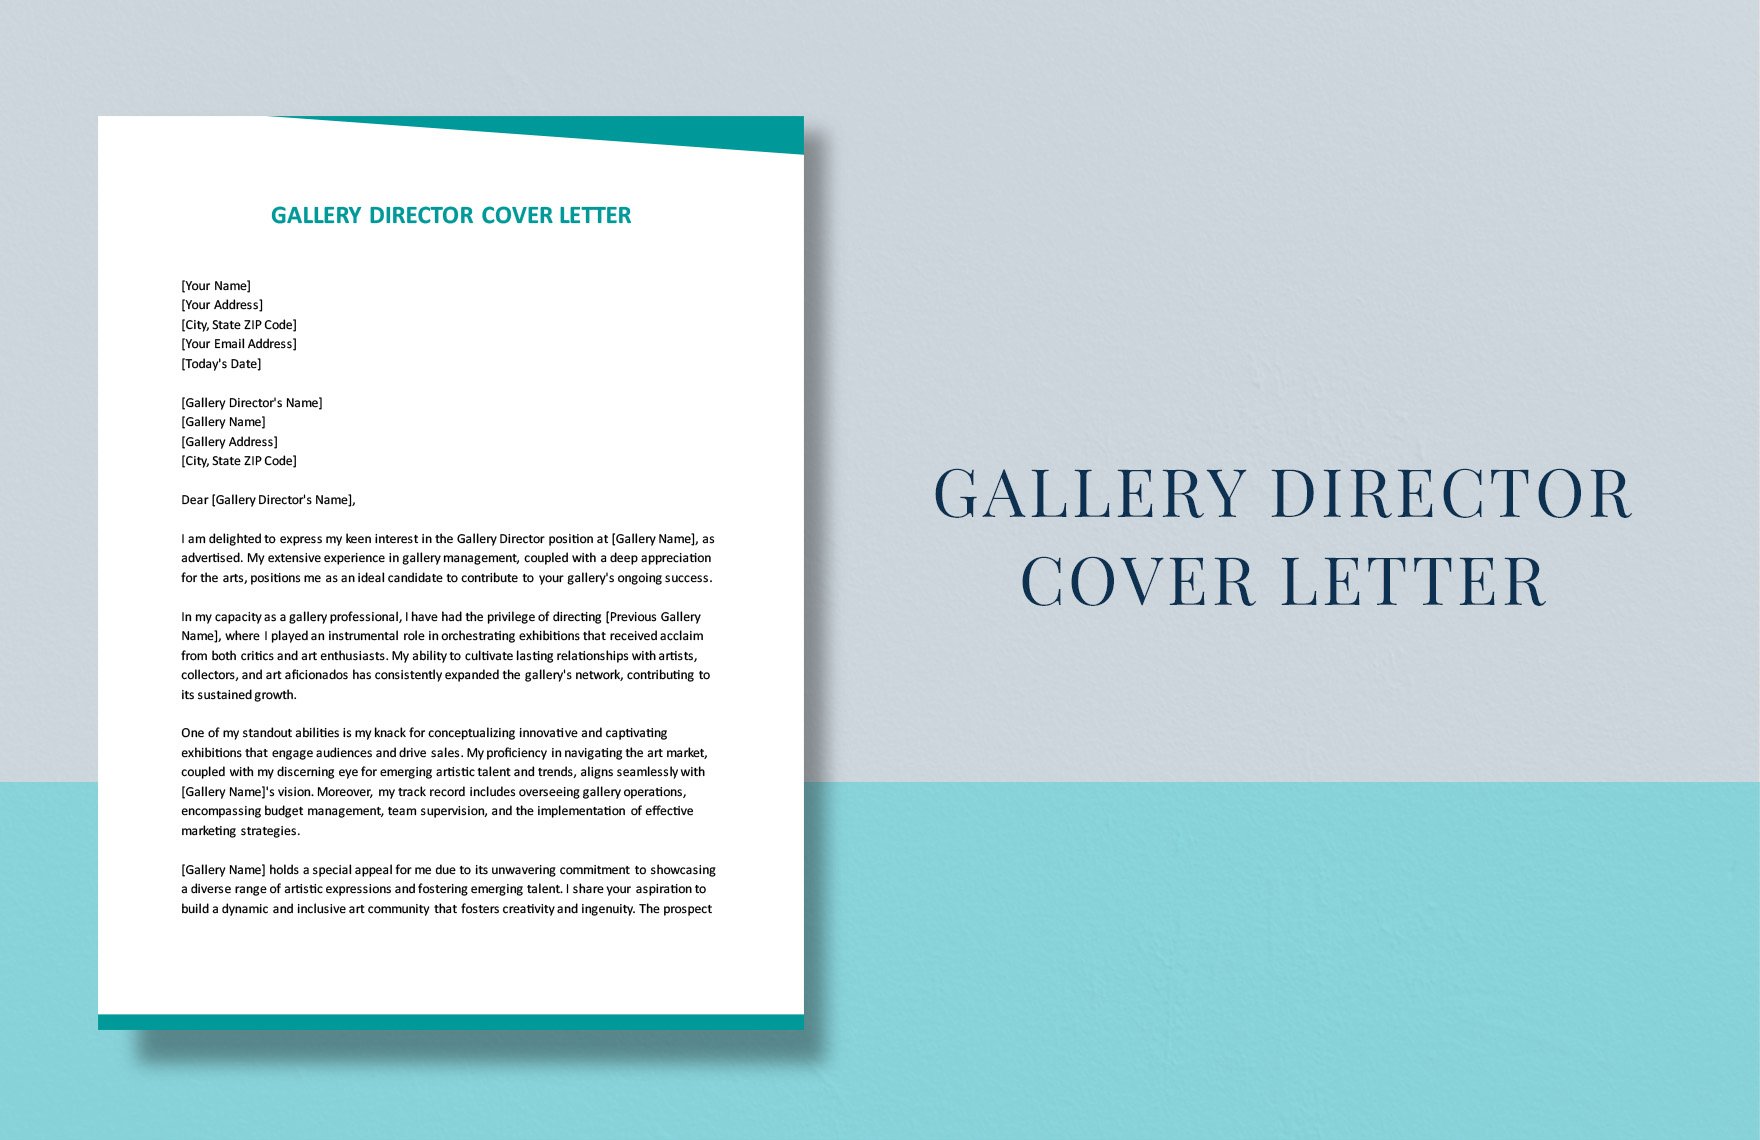 Gallery Director Cover Letter in Word, Google Docs, PDF